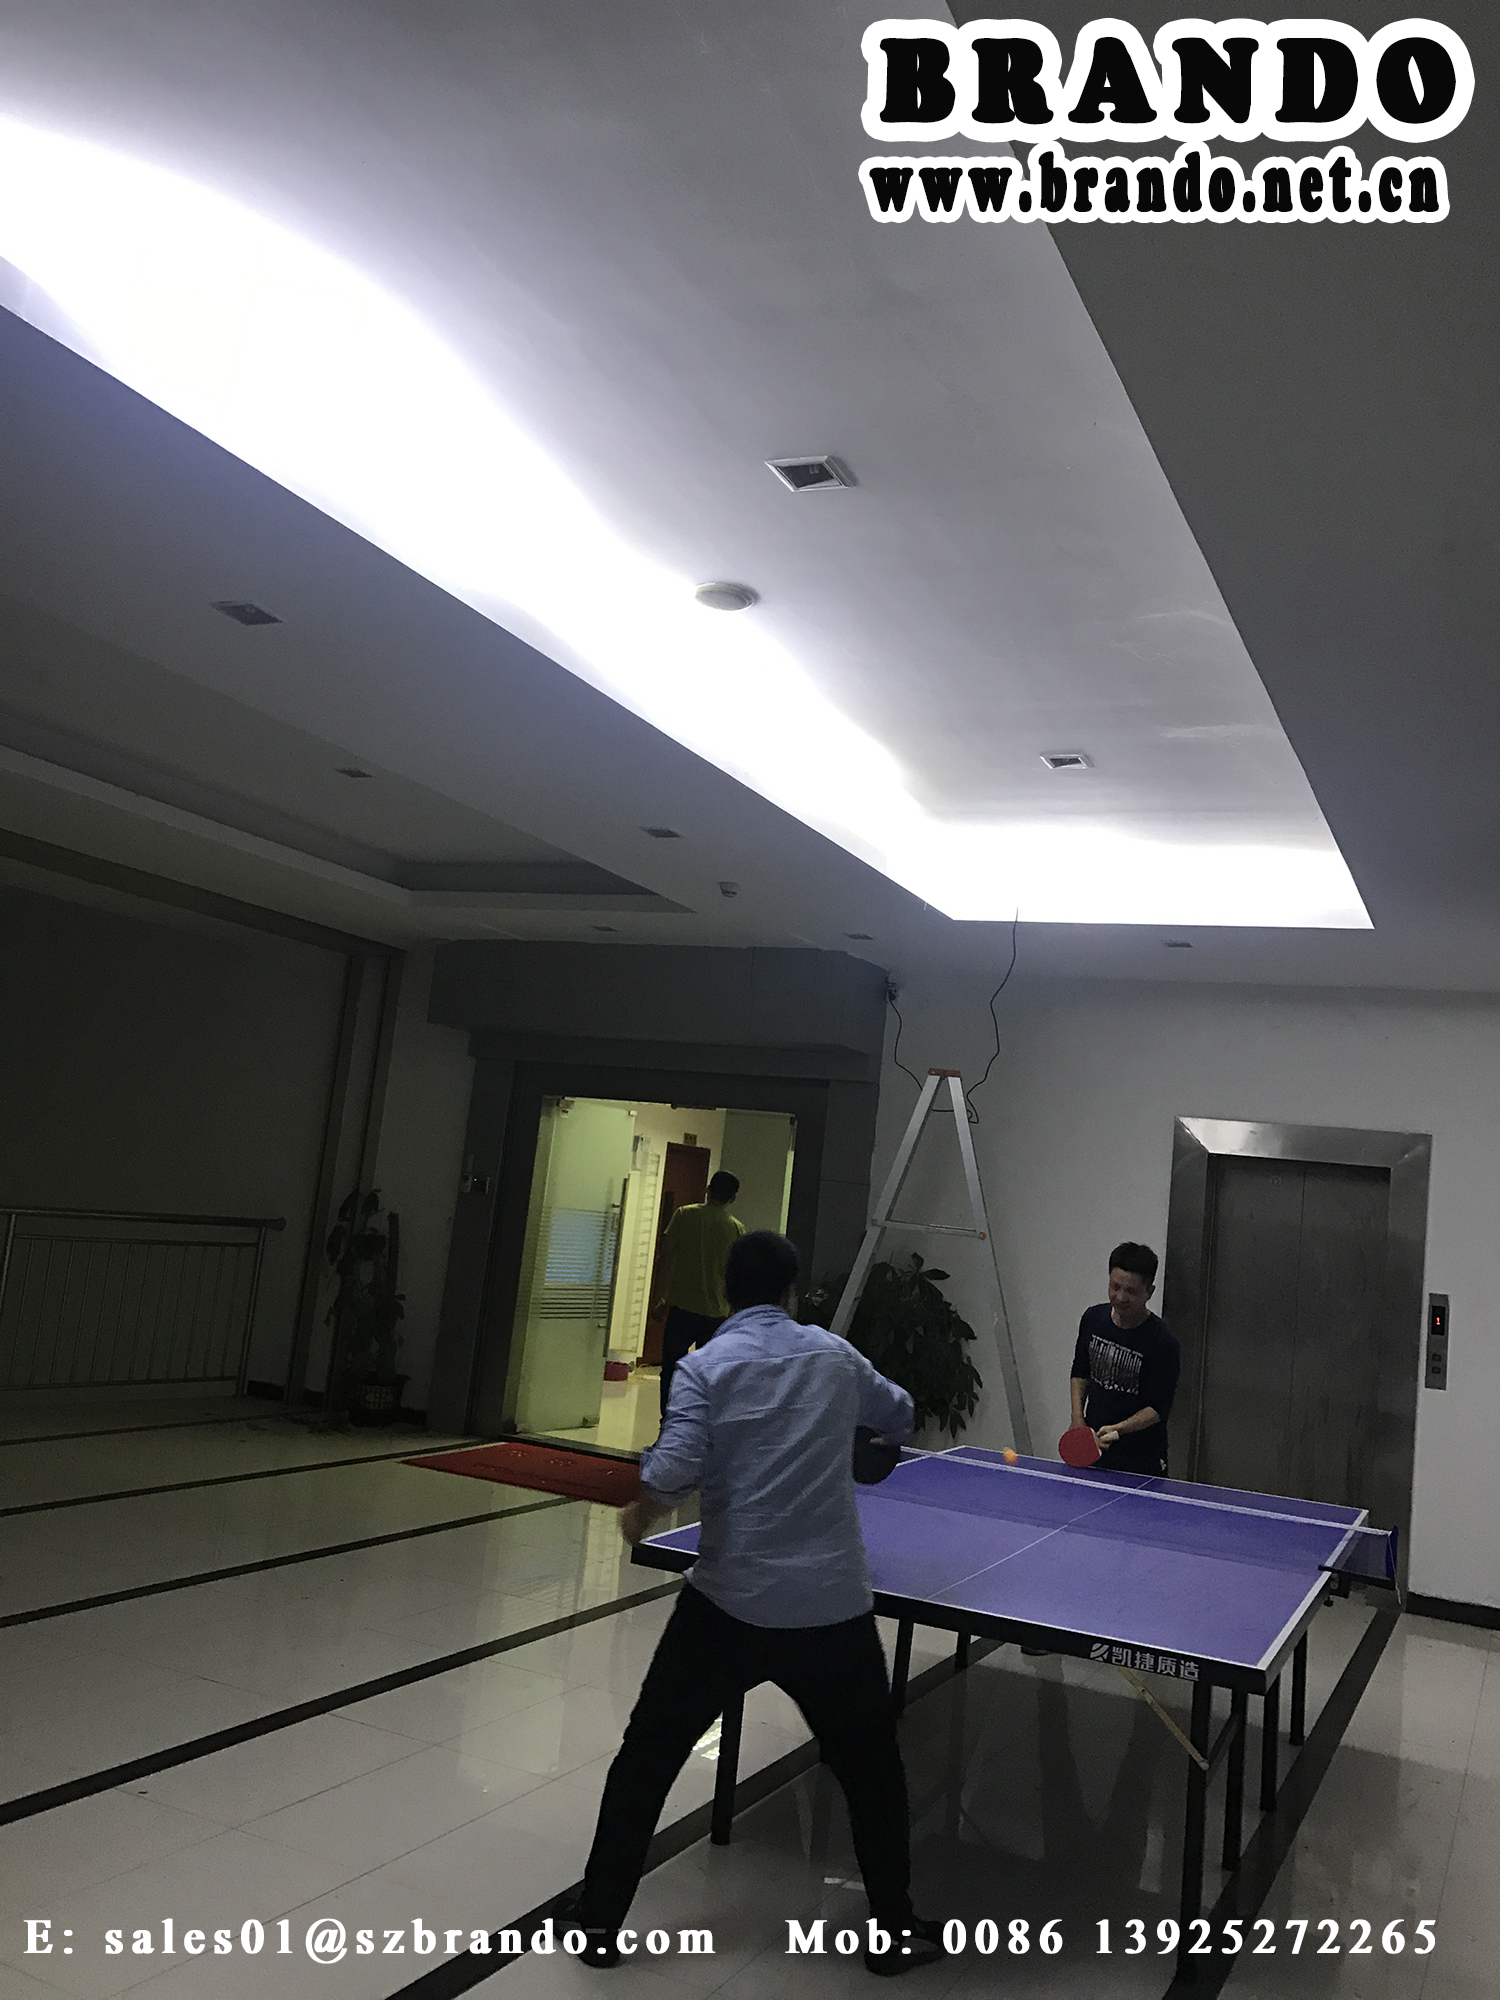 BRANDO Strip light for Employee's Night Activities - Ping Pong Competition